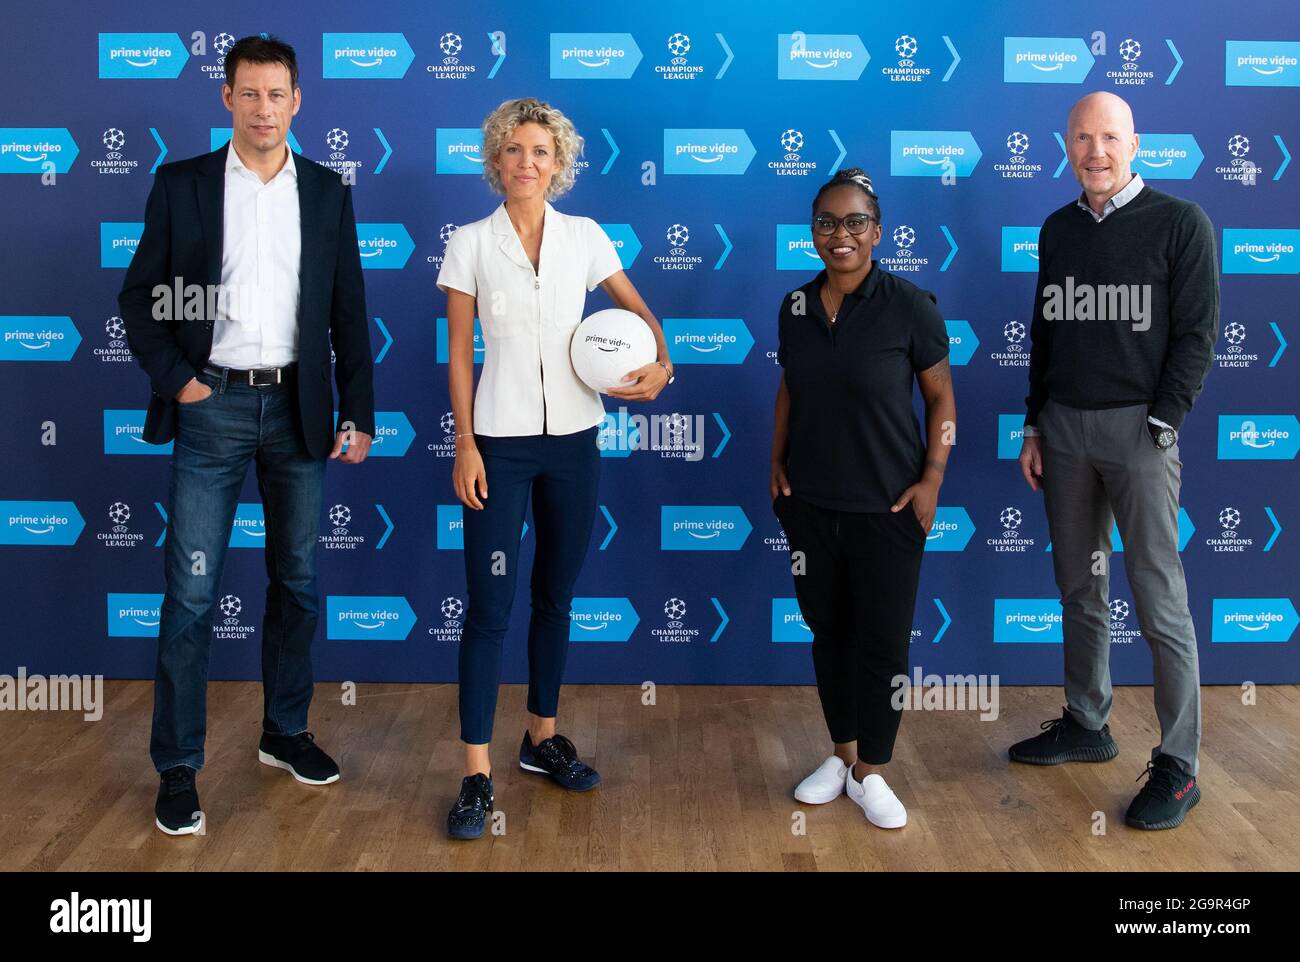 Munich, Germany. 27th July, 2021. Wolfgang Stark (l-r), referee expert,  Annika Zimmermann, presenter and reporter, Shary Reeves, presenter and  reporter, and Matthias Sammer, TV expert, take part in a press conference of